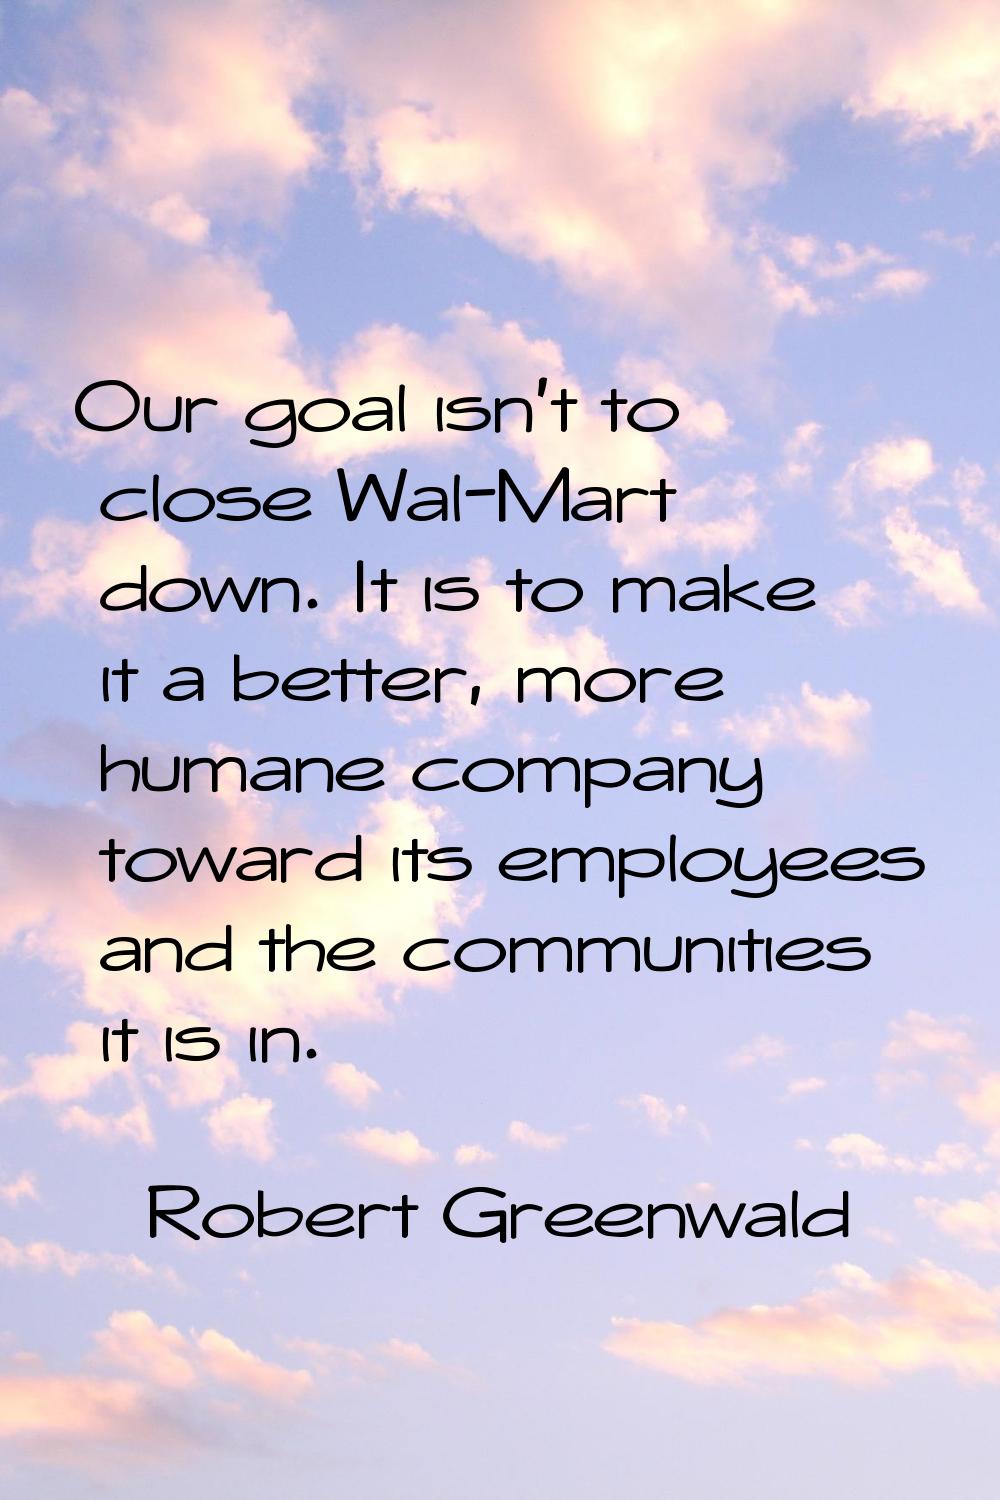 Our goal isn't to close Wal-Mart down. It is to make it a better, more humane company toward its em